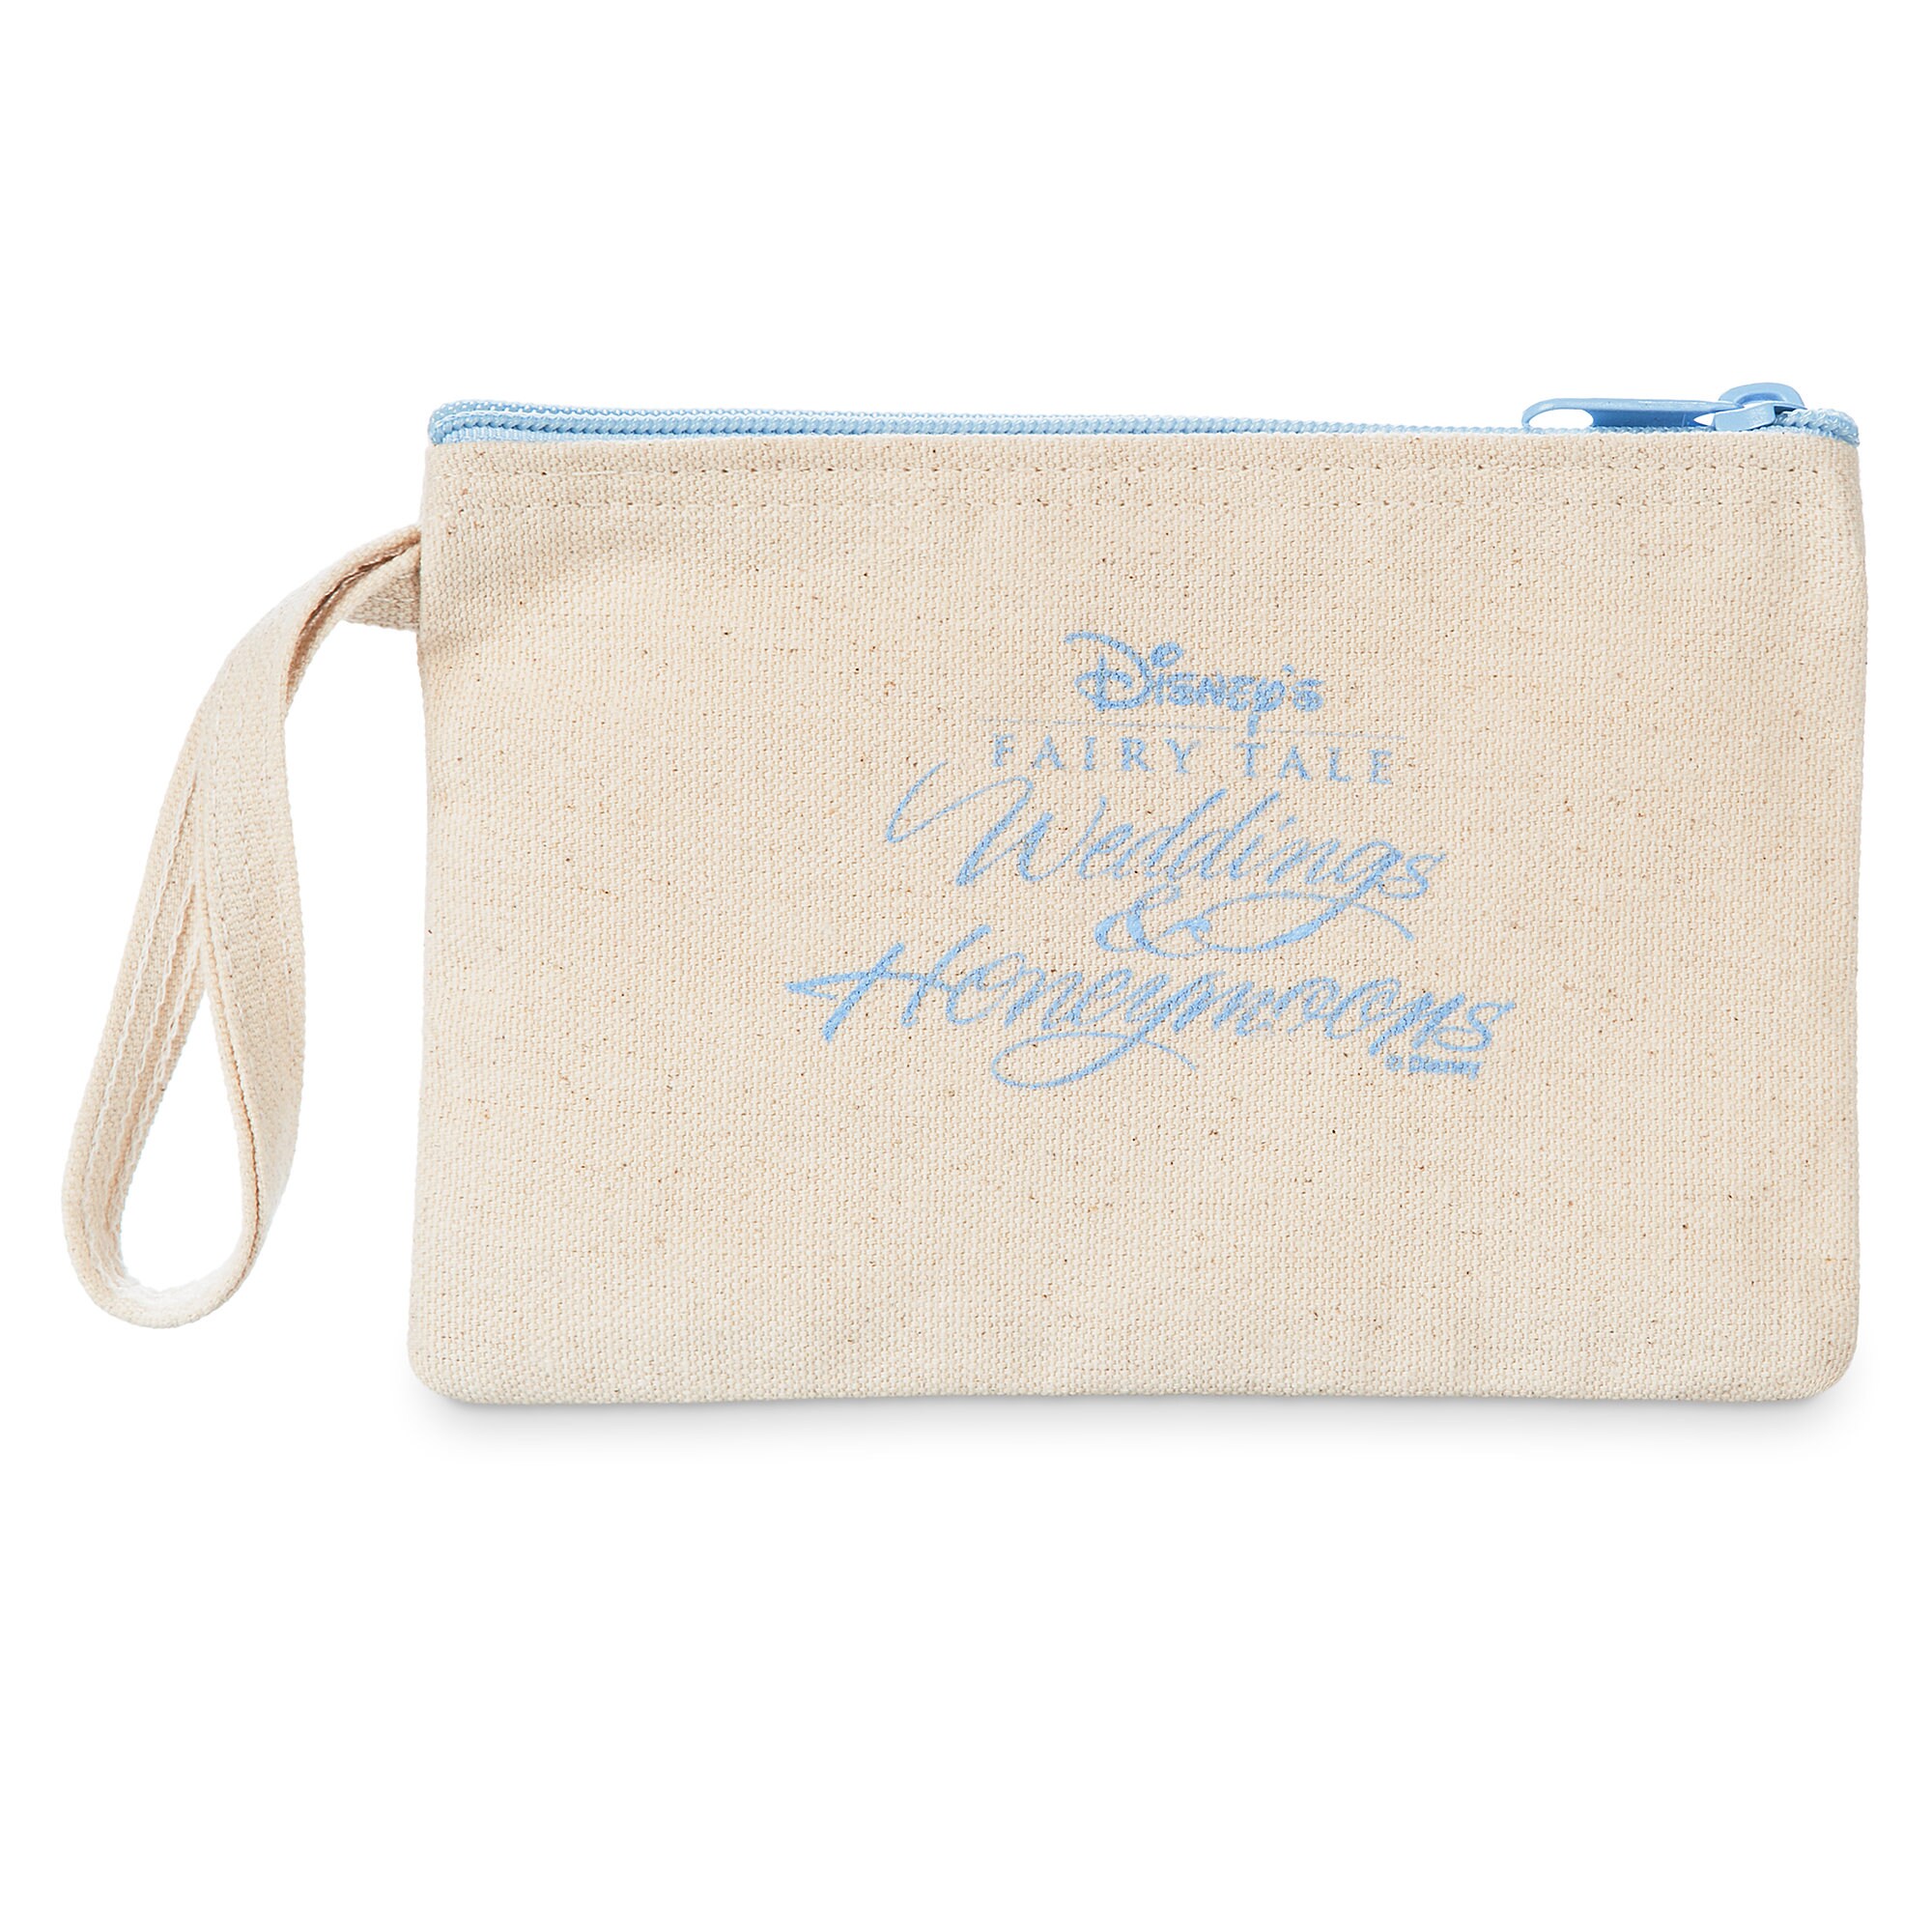 Happily Ever After Zip Pouch